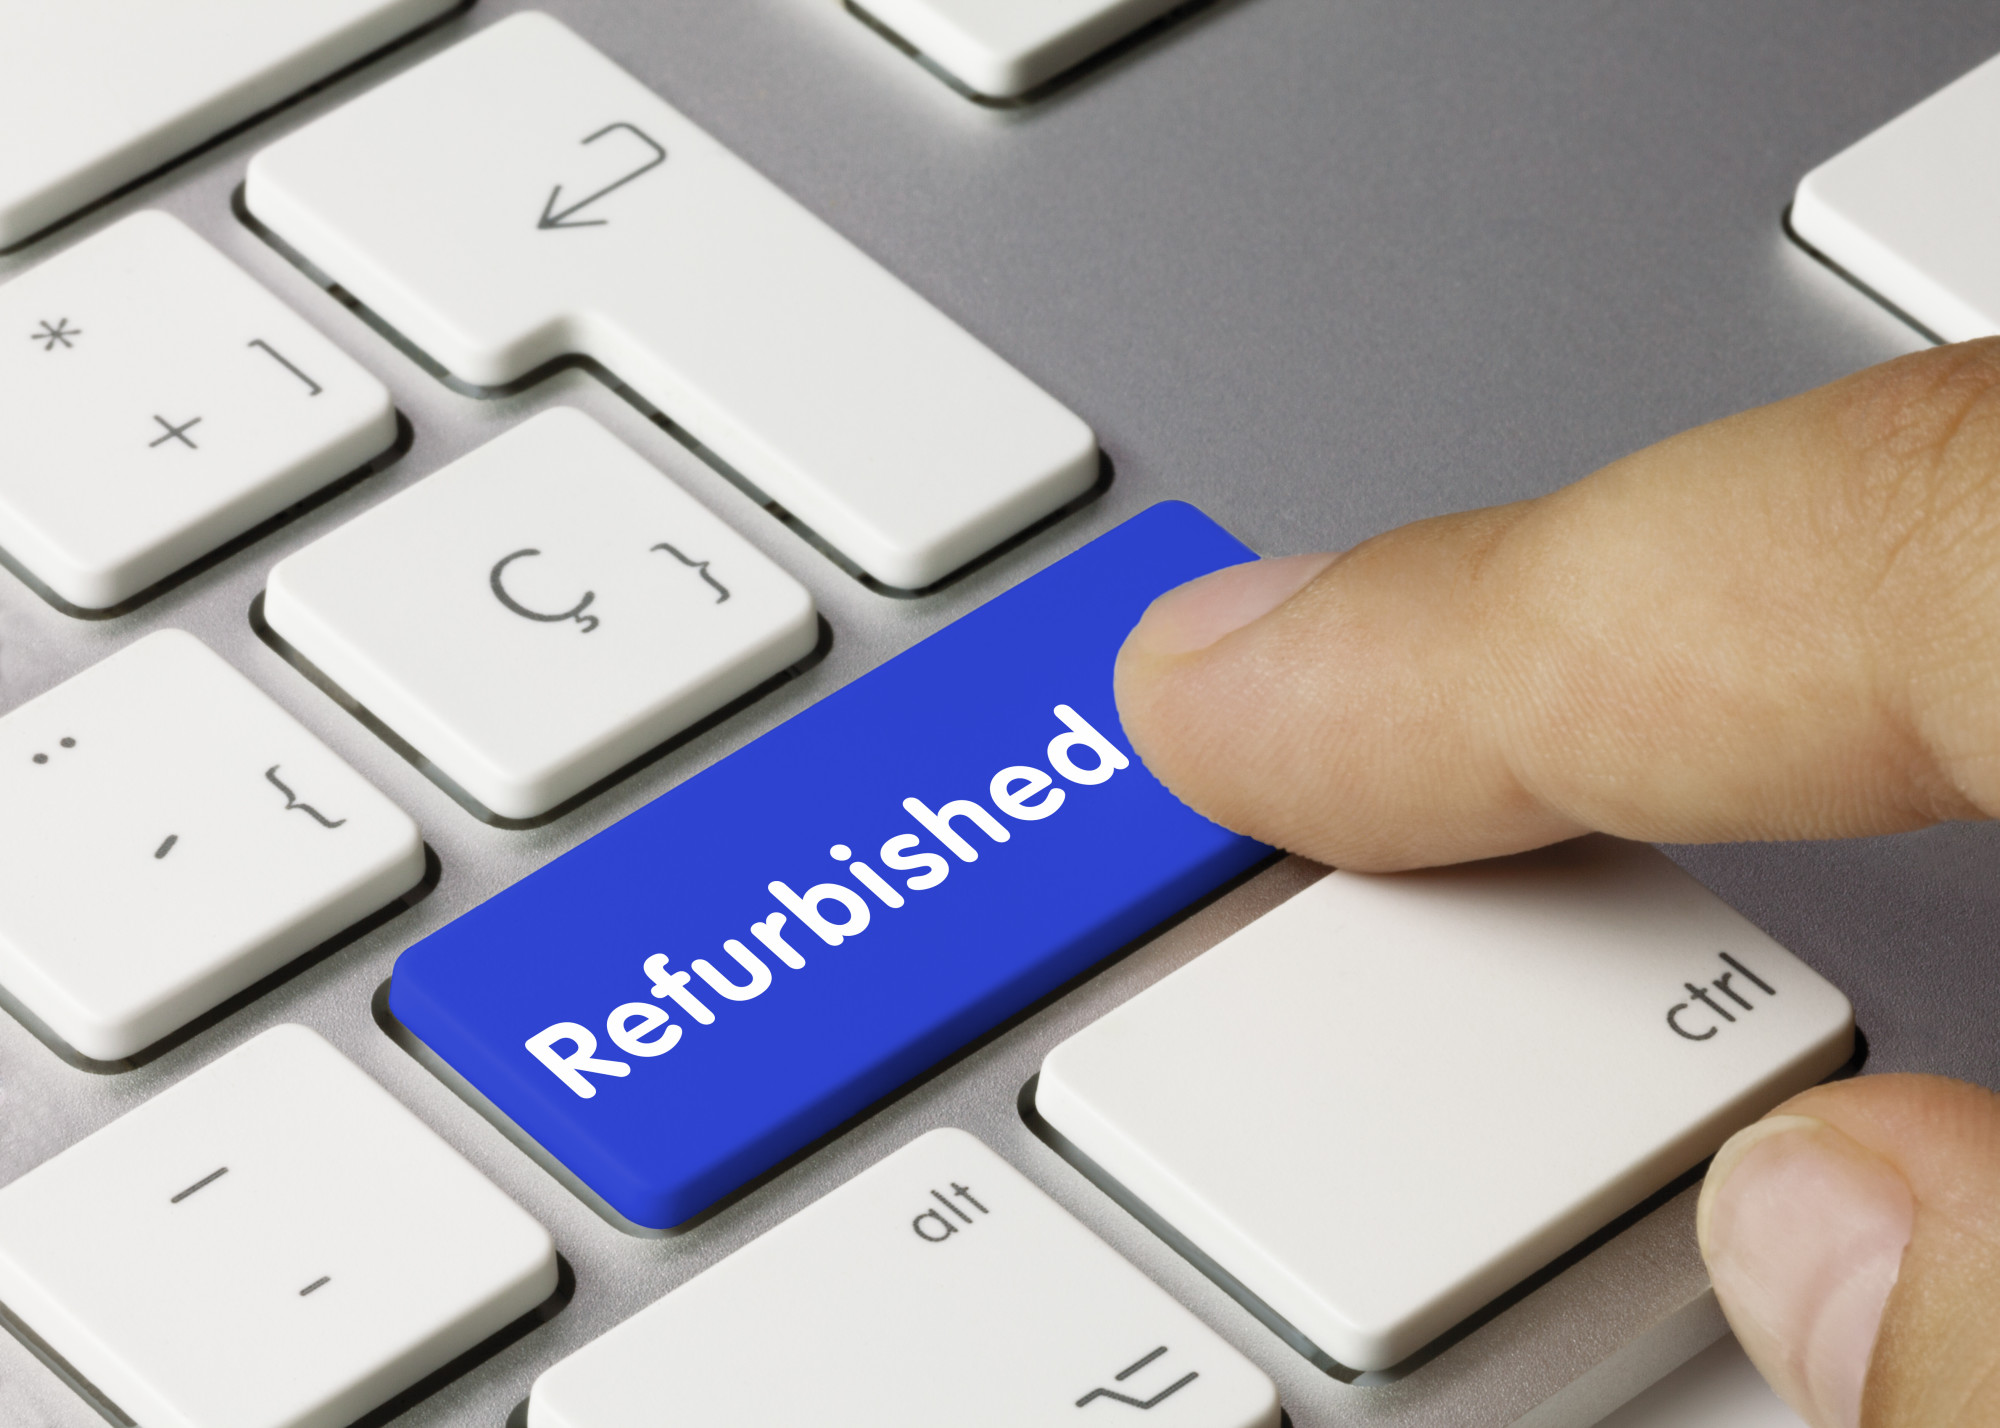 Refurbished vs. Used Electronics: What Are the Differences?